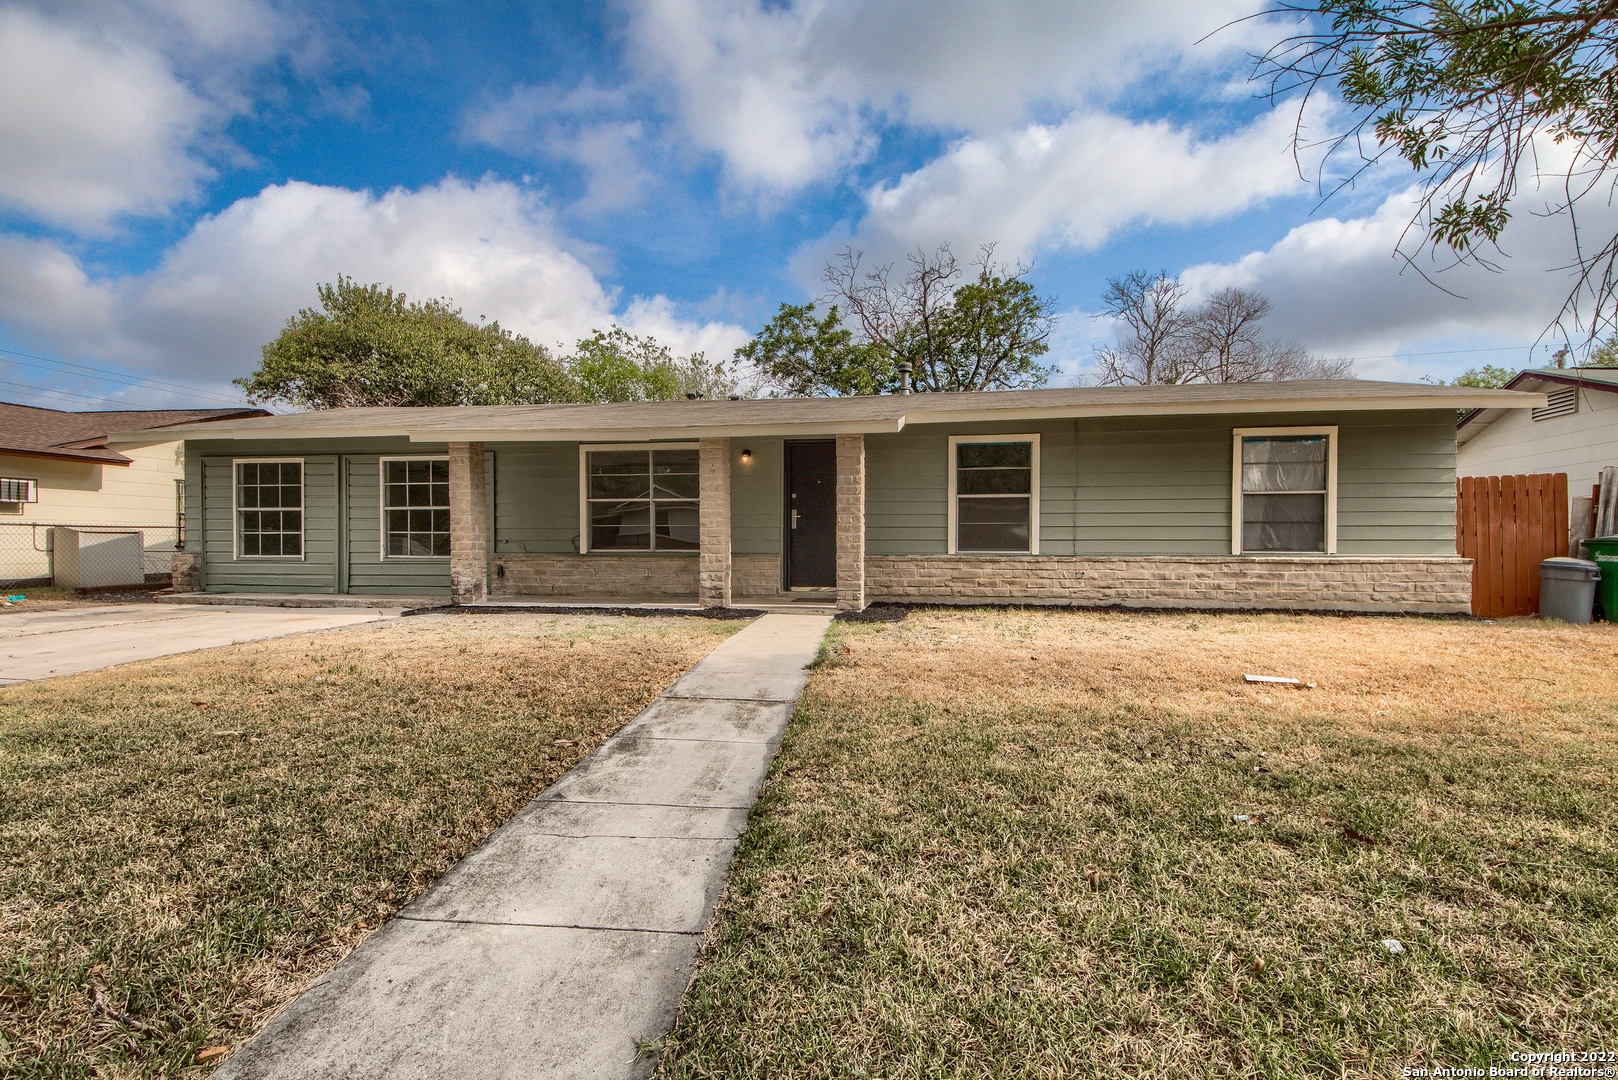 : Spacious fully renovated one story house!! This house has 3 bedrooms. 2 bath and is ready for a new family to make it home. Renovated kitchen & Bathrooms ,New roof, granite counters, new paint,new tile flooring throughout, spacious backyard with a large covered patio. Close to Loop 410 and Loop 1604, 8 minutes to Hwy 151, 19 minutes to Sea World, close to air force base and shopping centers. Don't miss out this Great Opportunity.